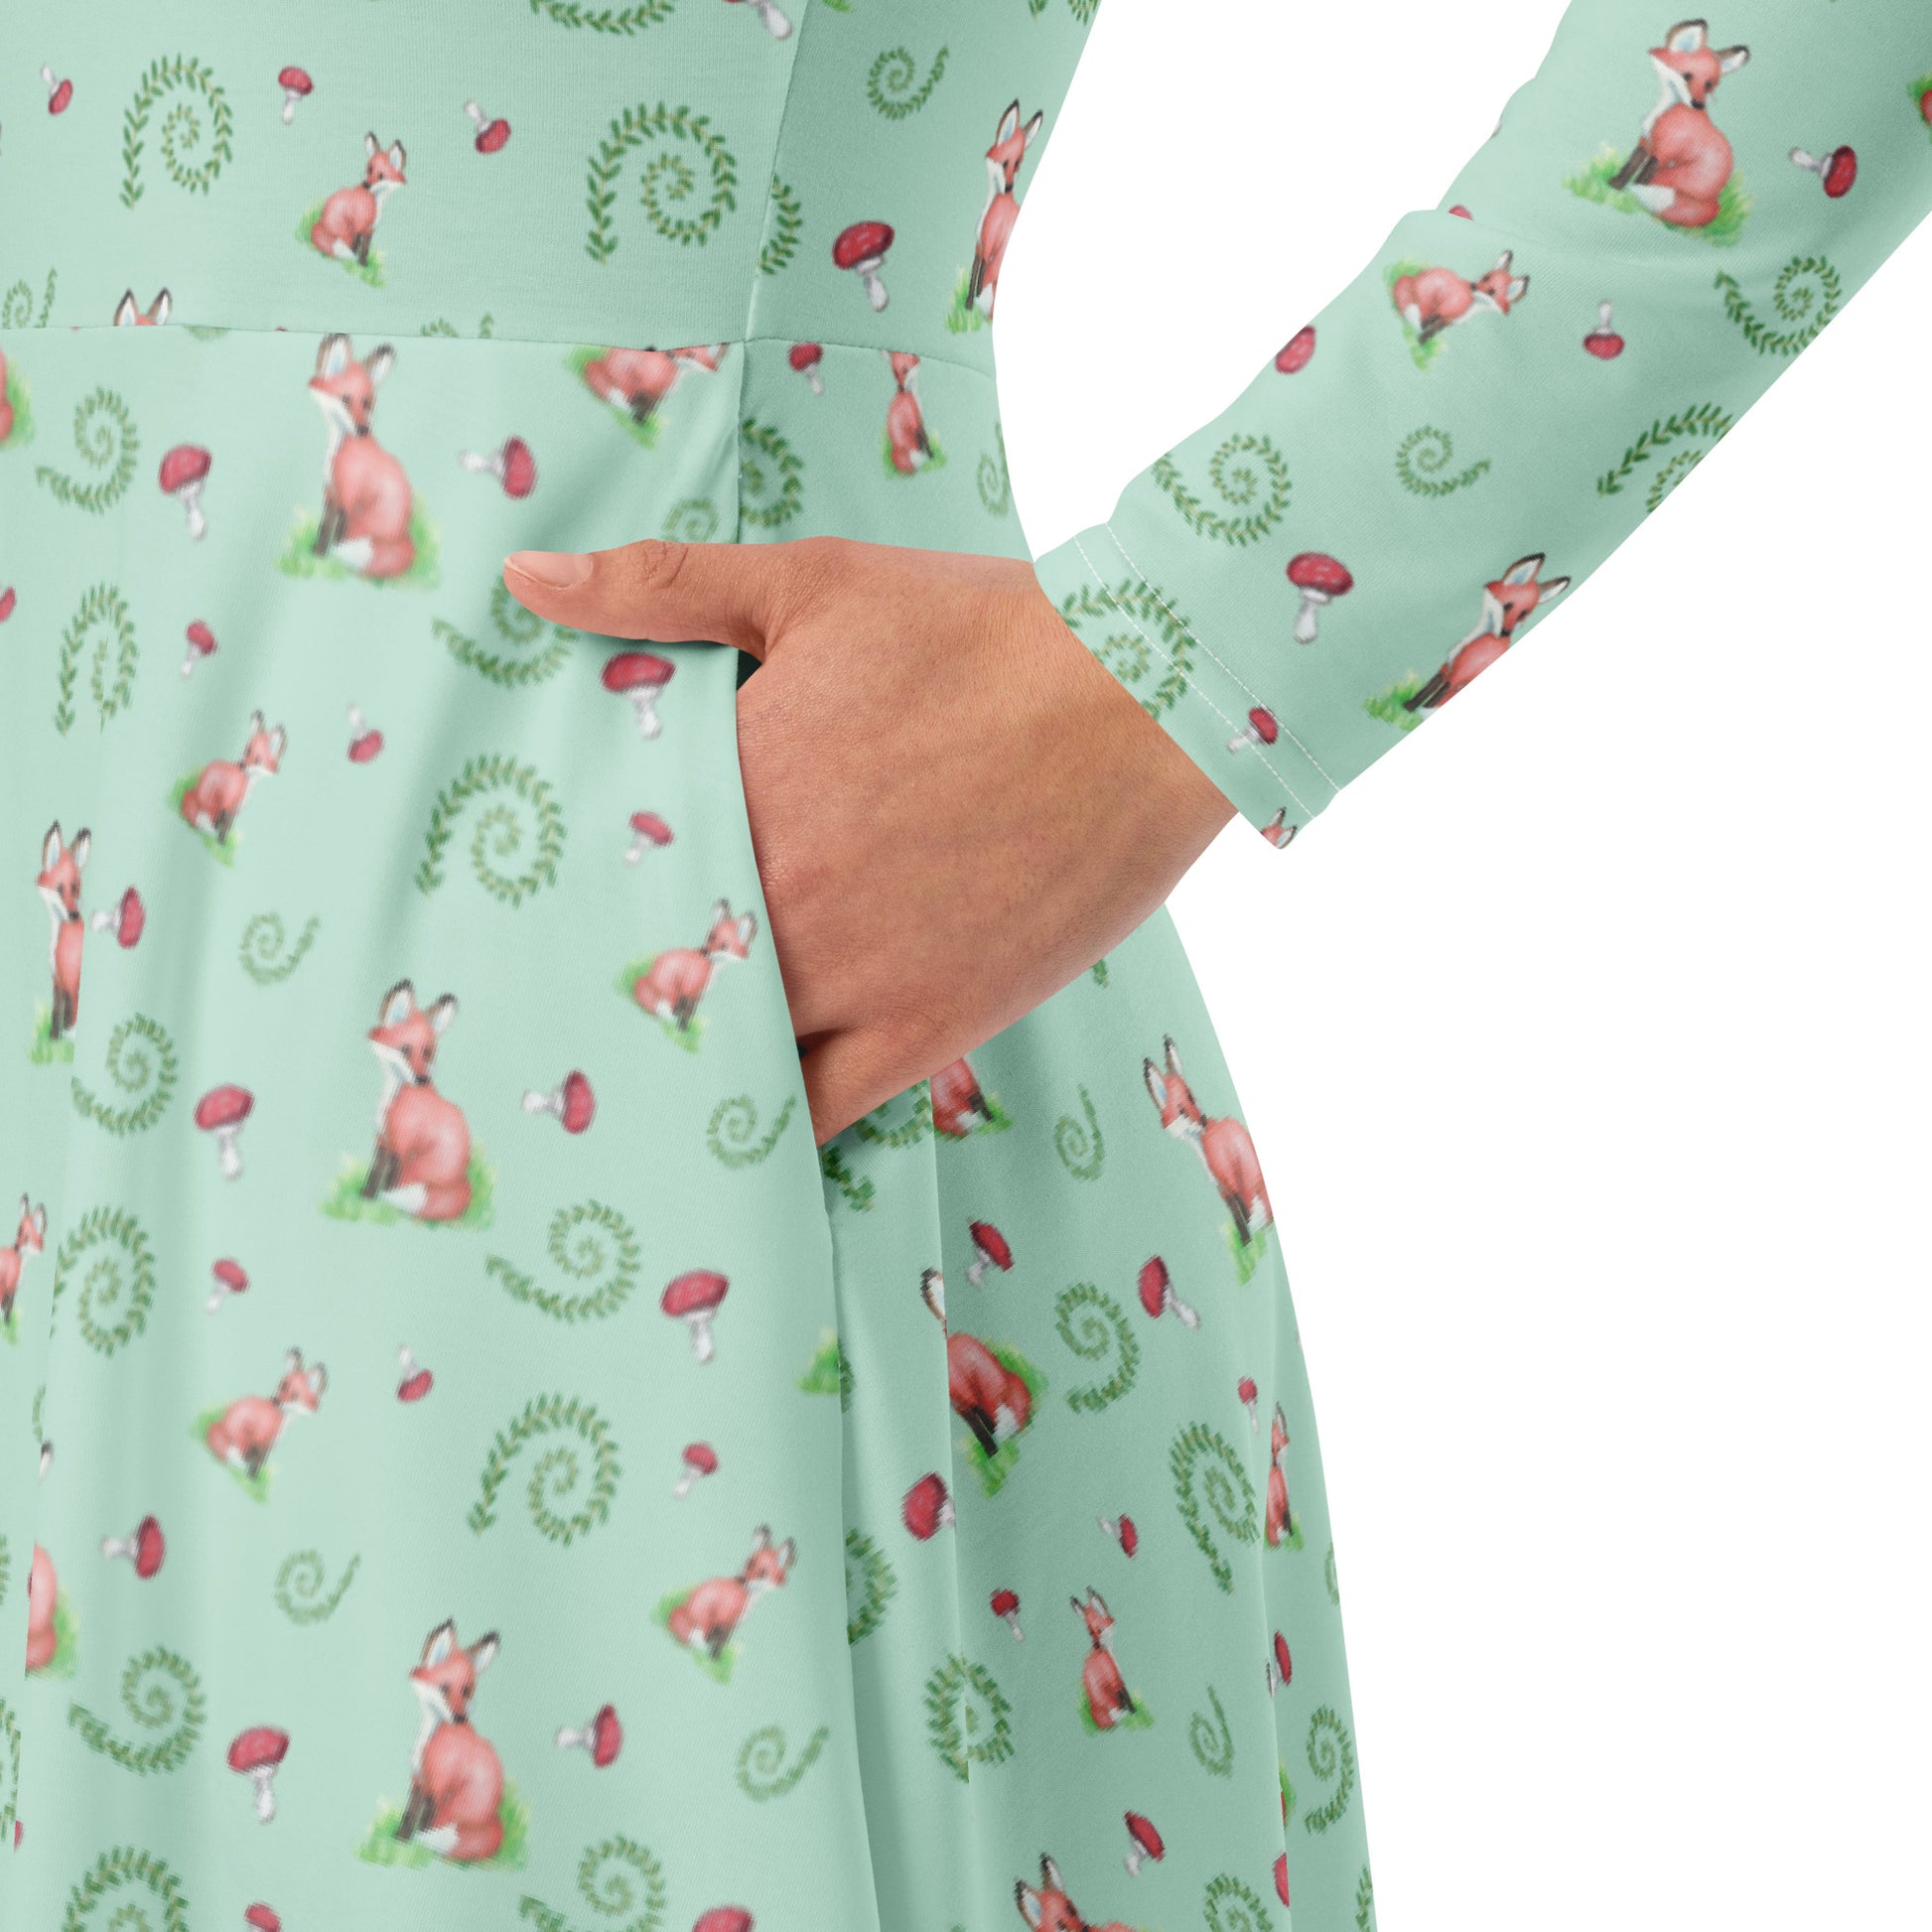 Forest fox patterned long sleeve midi dress with side pockets. Has watercolor foxes, mushrooms, and ferns on a light green fabric. Features boat neckline and fitted elastic waist. View shows close-up of hand in pocket.